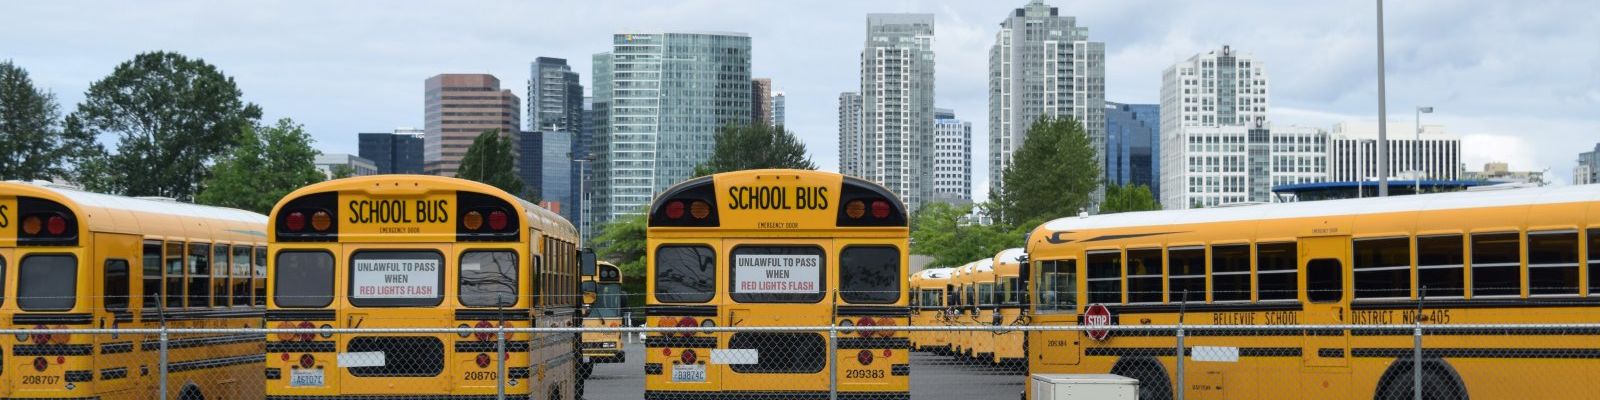 Image of Bellevue school buses with downtown skyline in background